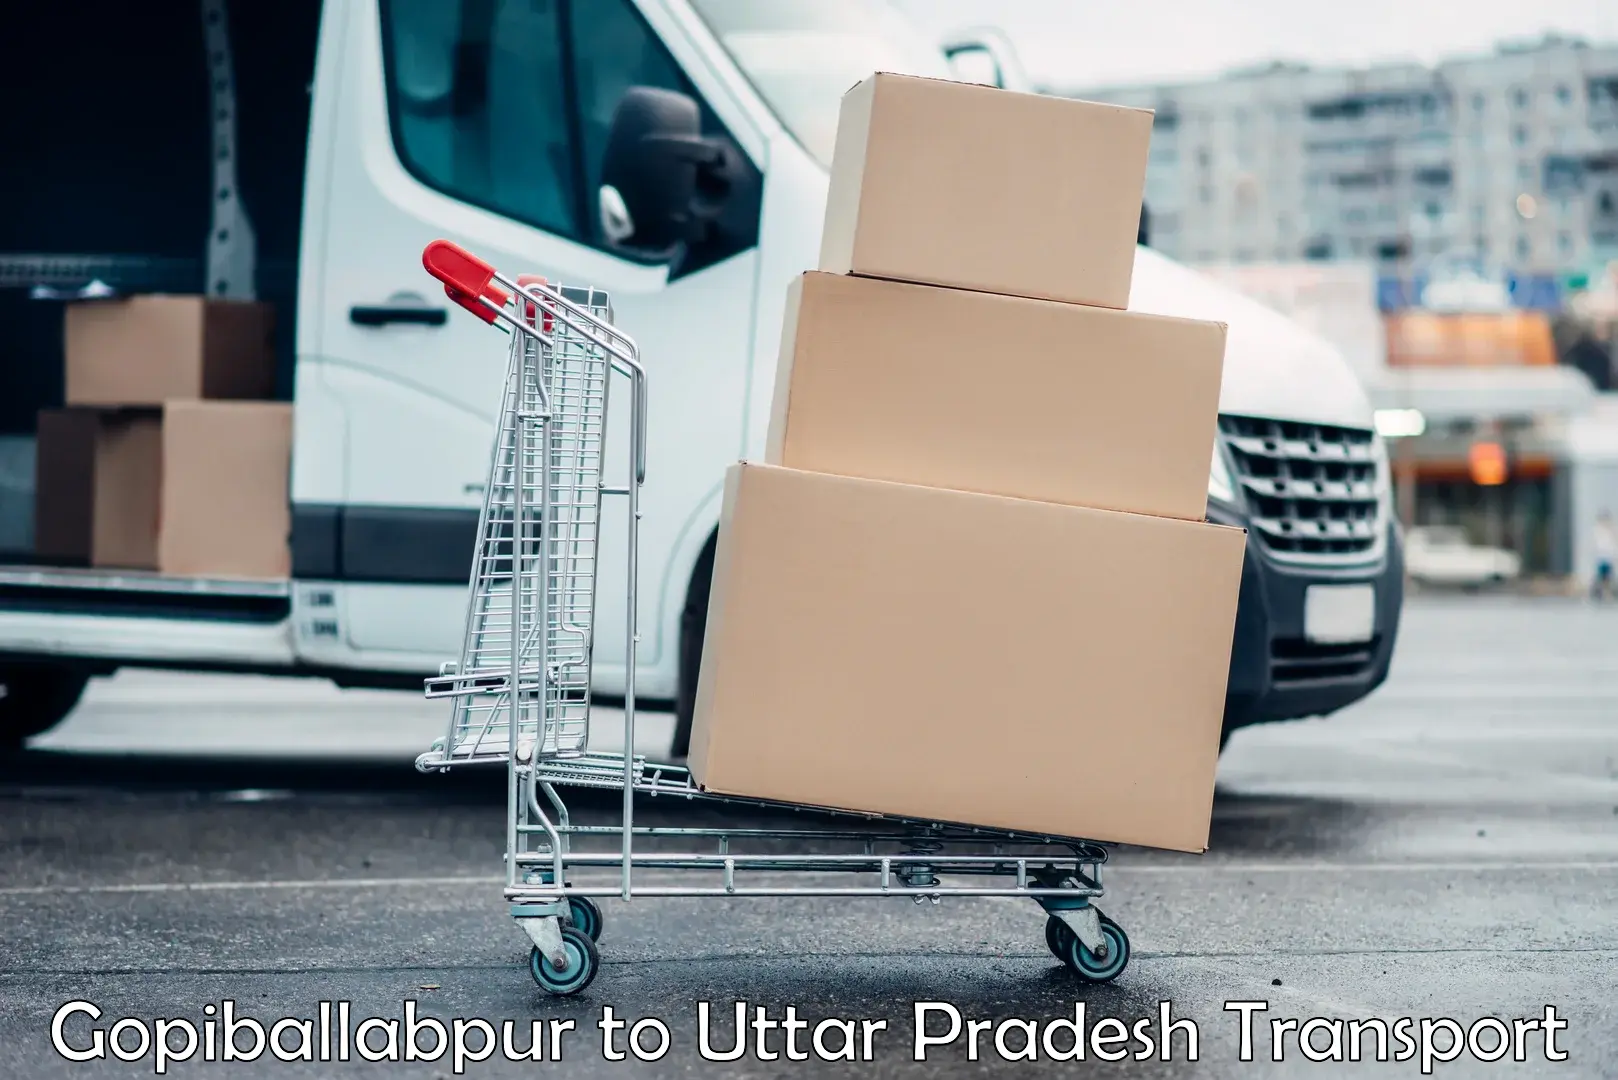 Delivery service Gopiballabpur to Ghazipur